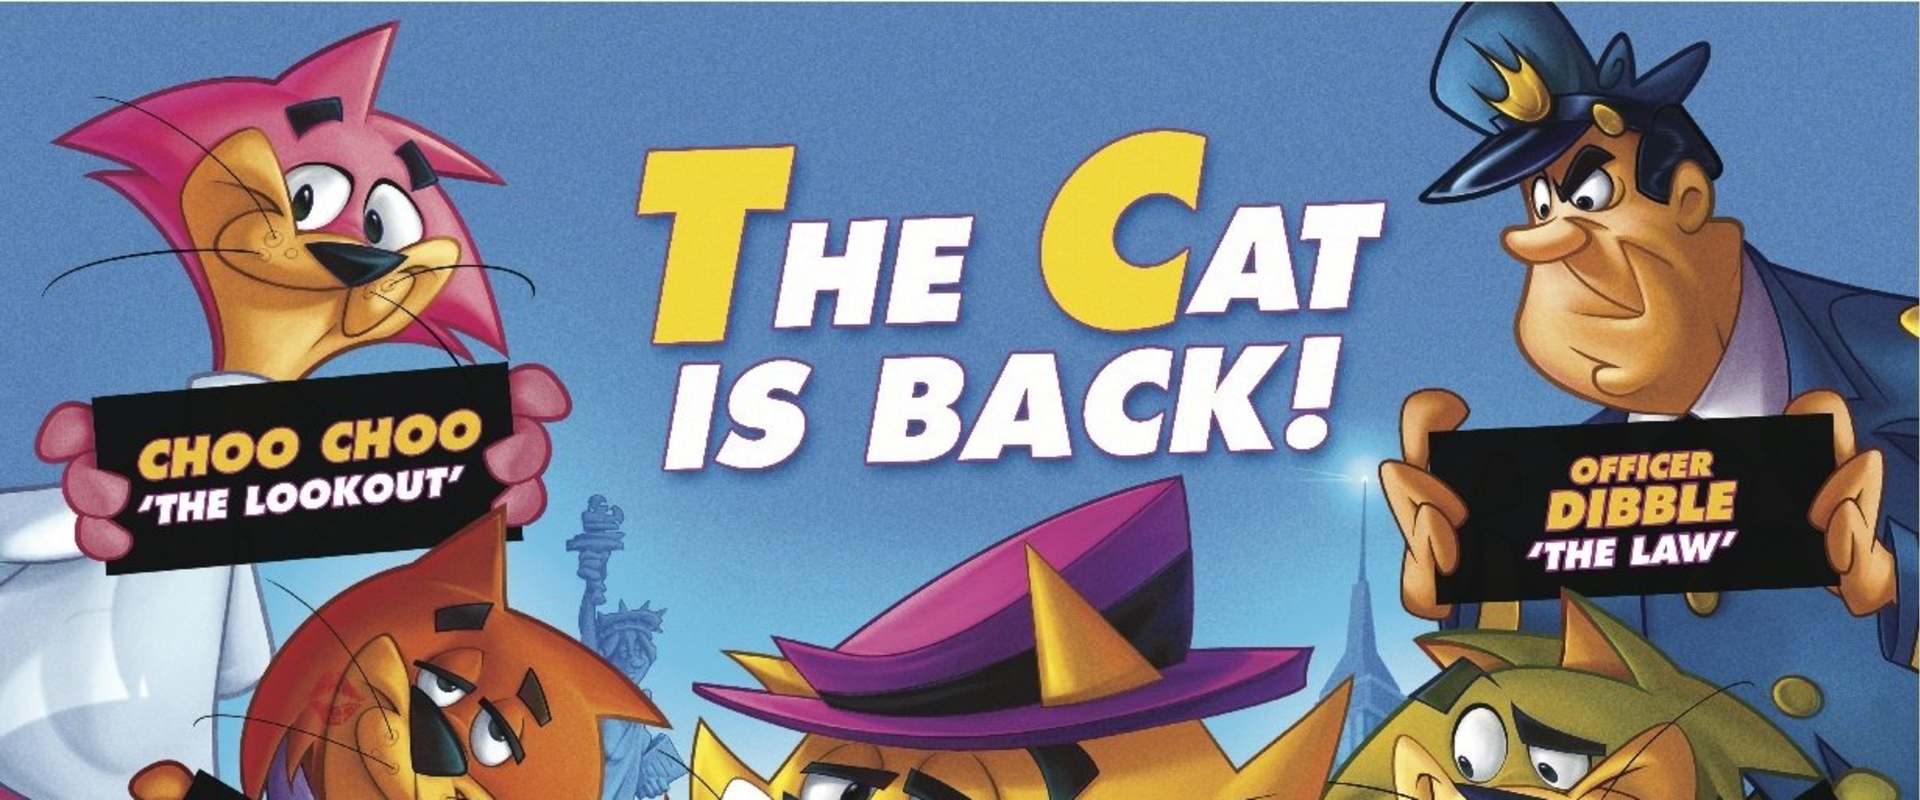 Top Cat: The Movie background 2